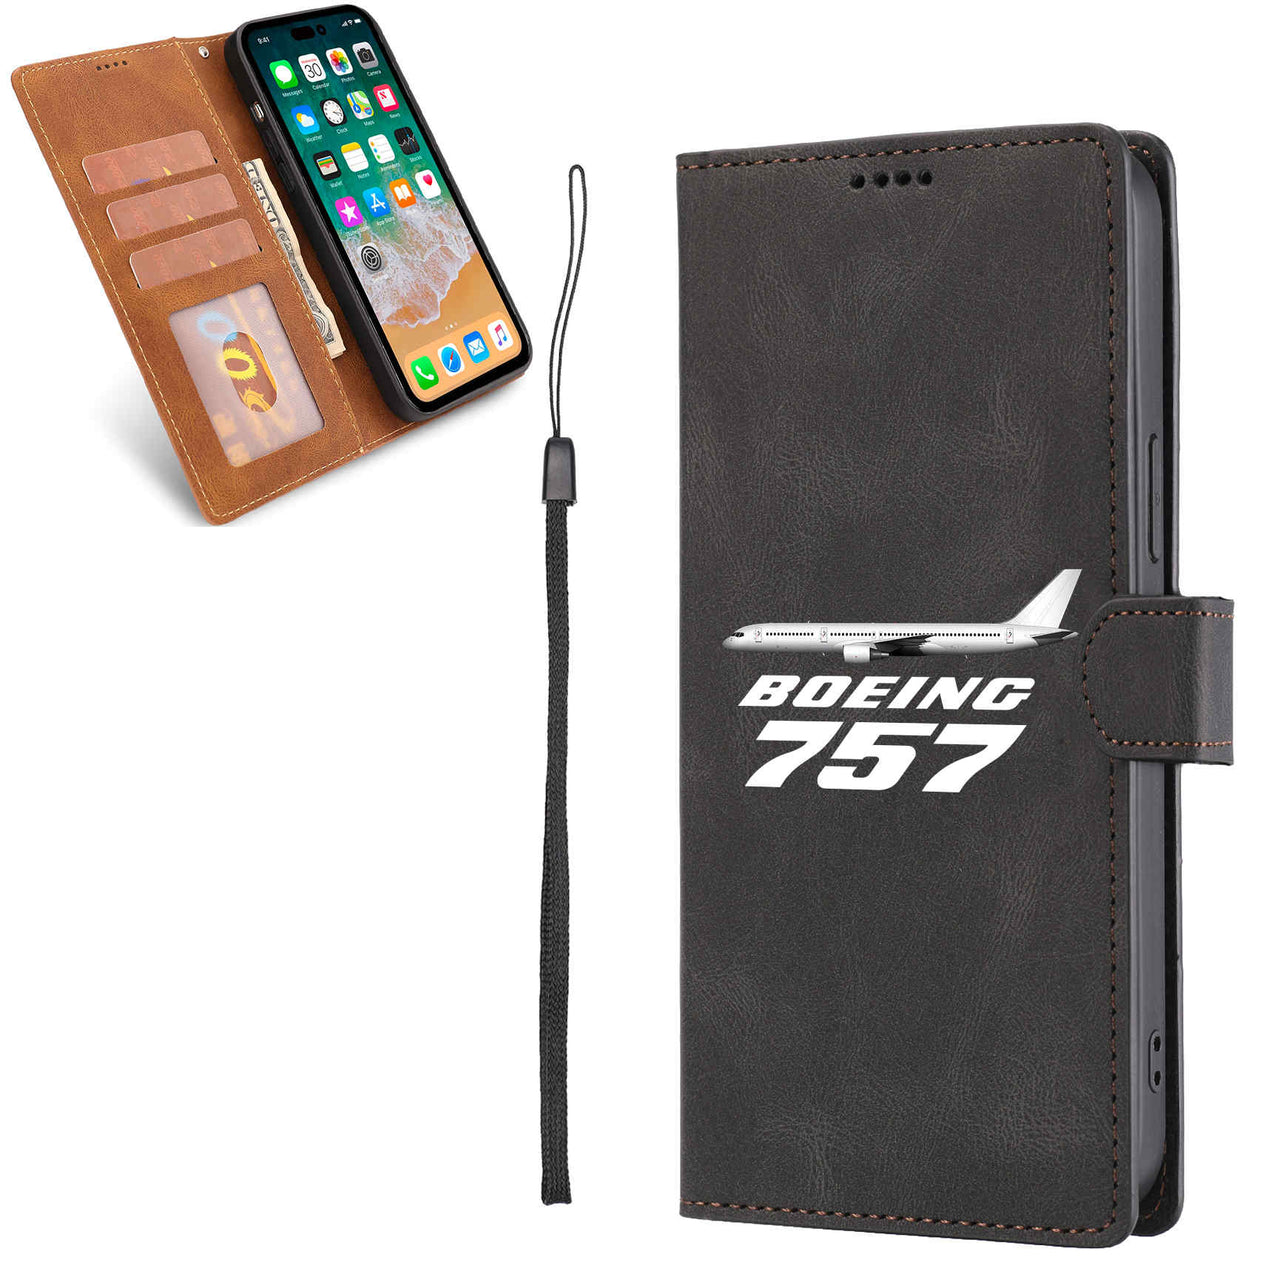 The Boeing 757 Designed Leather Samsung S & Note Cases